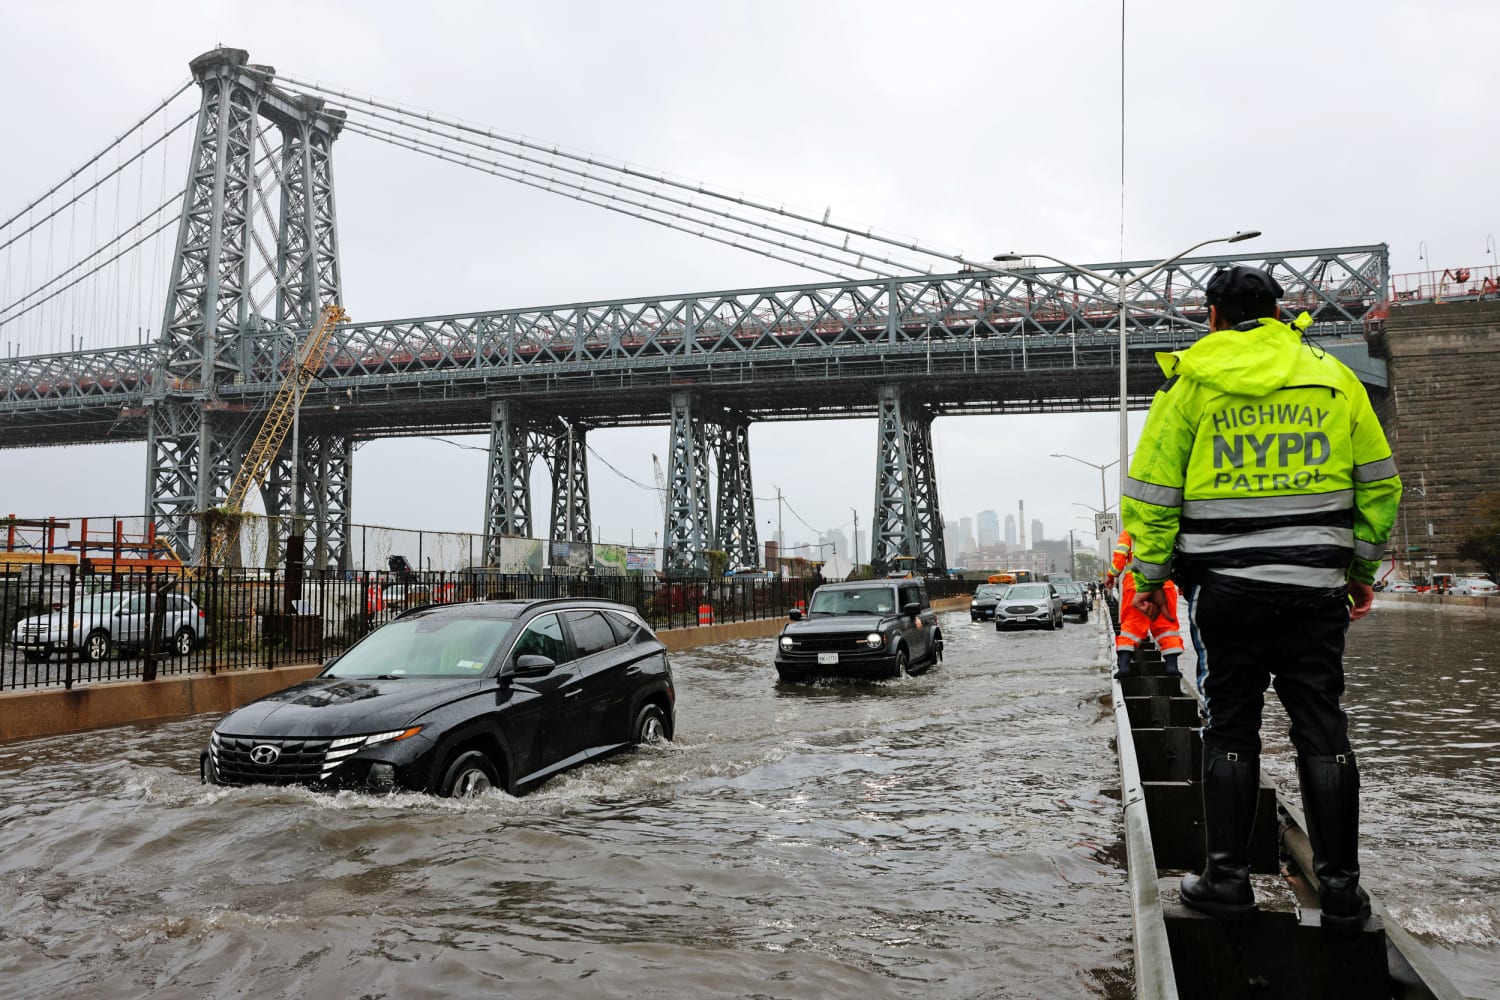 New York City could see historic flooding as up to 6 inches of rain reaches the Northeast